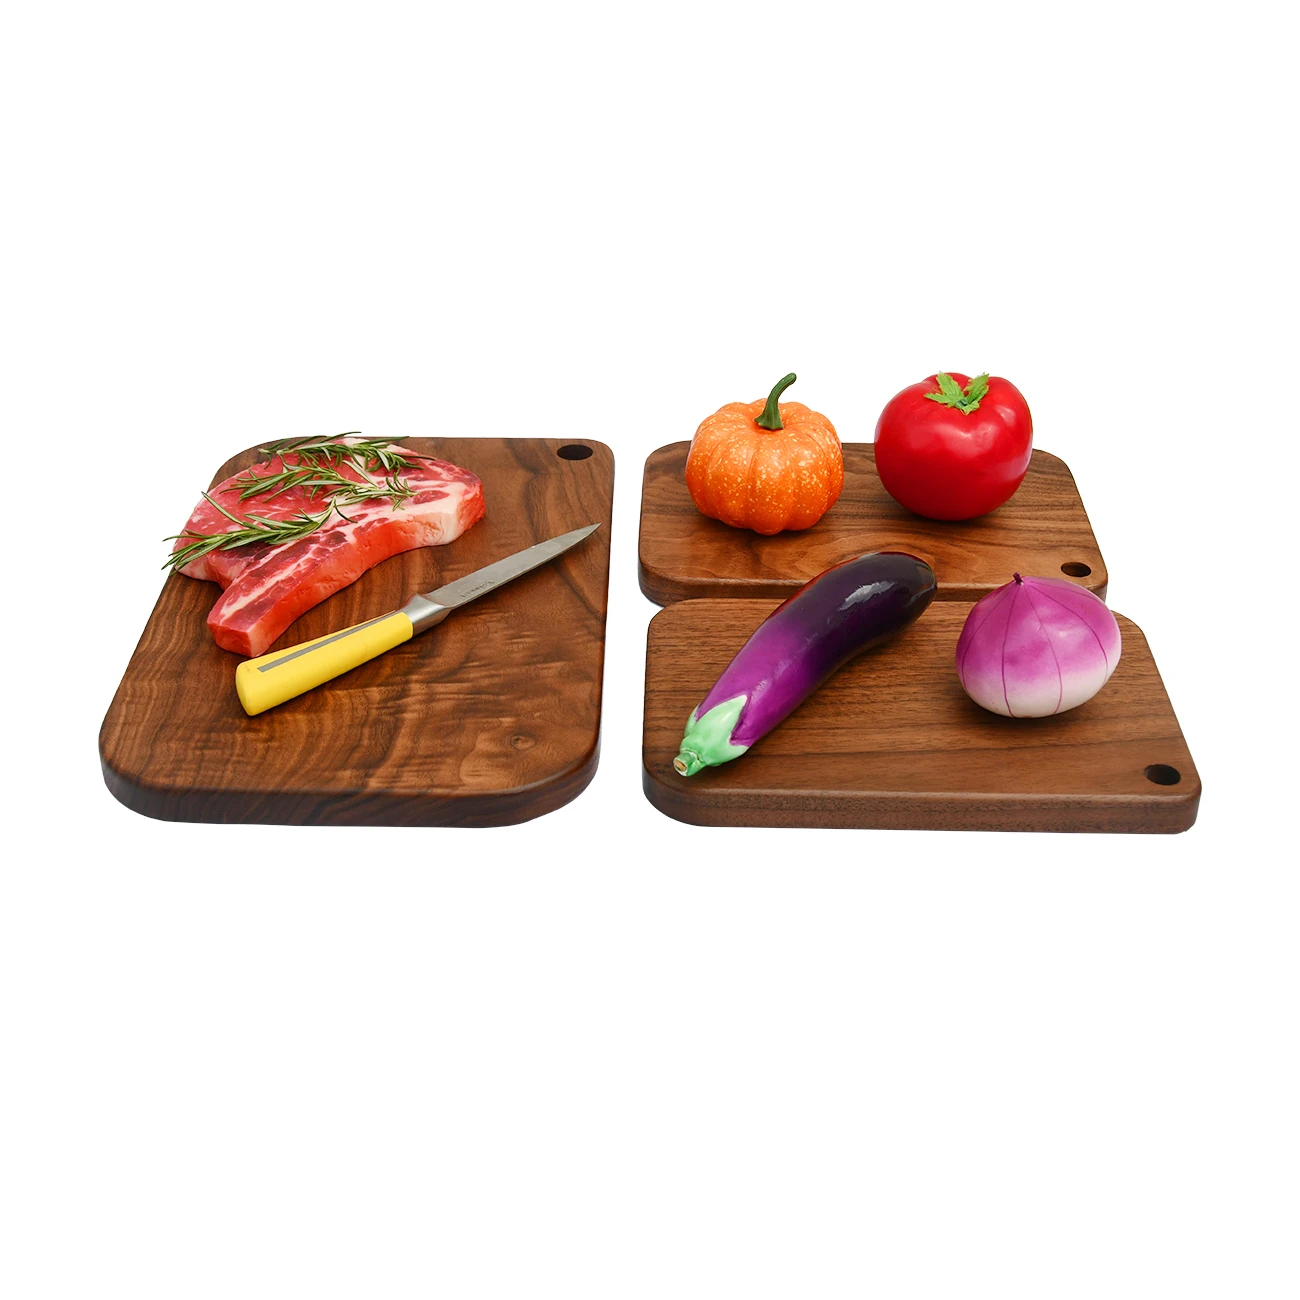 Premium Walnut Wood Cutting Board Set Of 3 With Handles  For Home &Kitchen